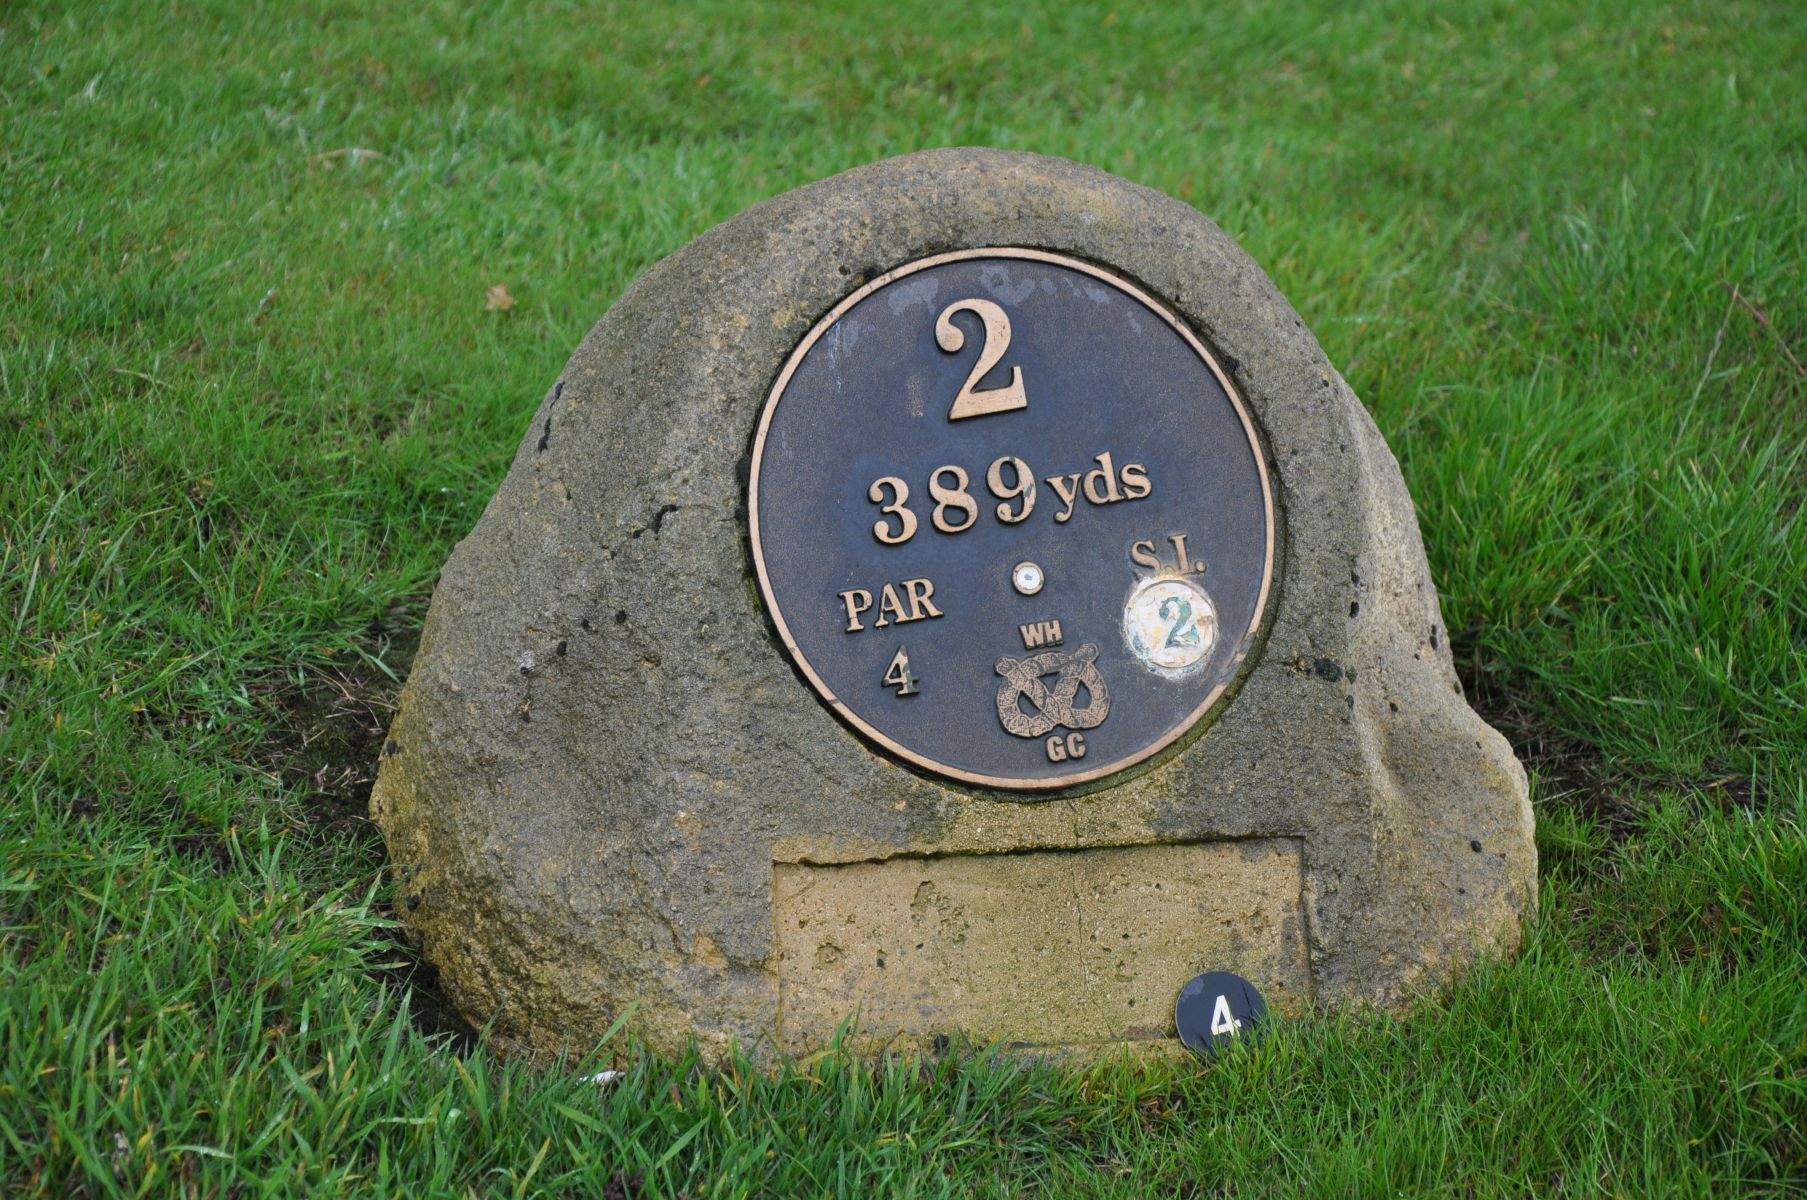 THE WHITE TEE MARKER FOR HOLE TWO